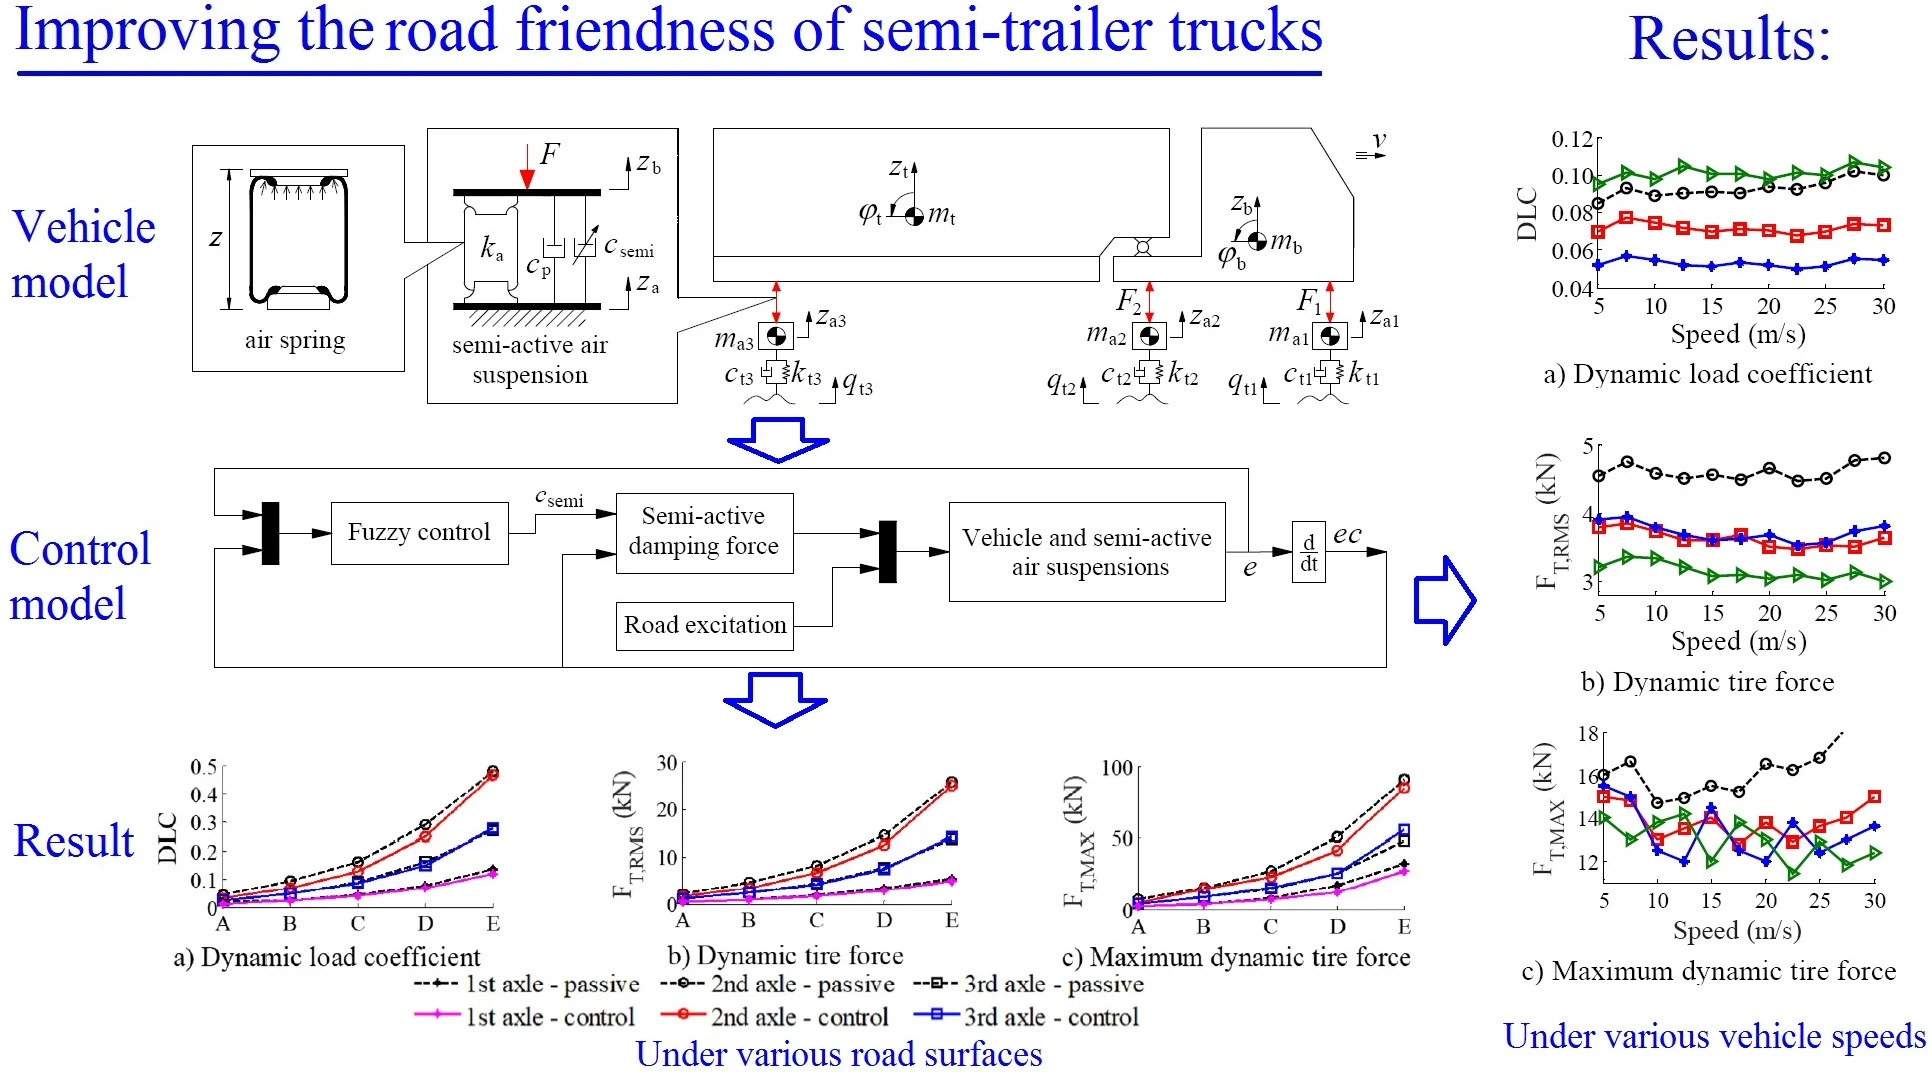 Control of the air suspension system of semi-trailer trucks to enhance the road friendliness